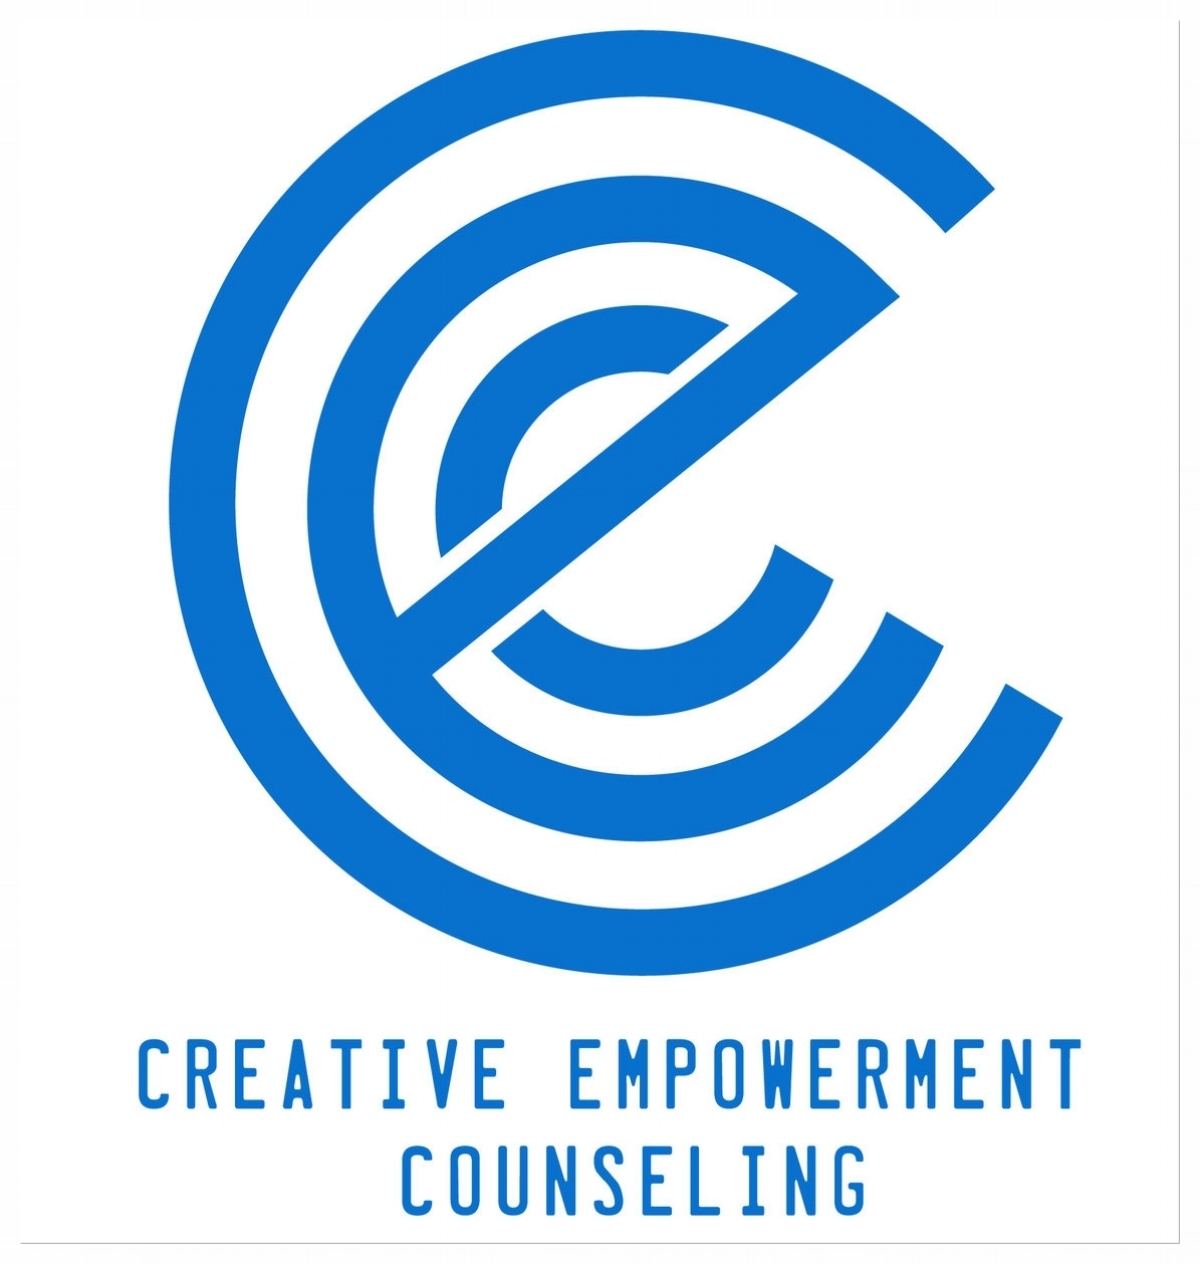 Creative Empowerment Counseling